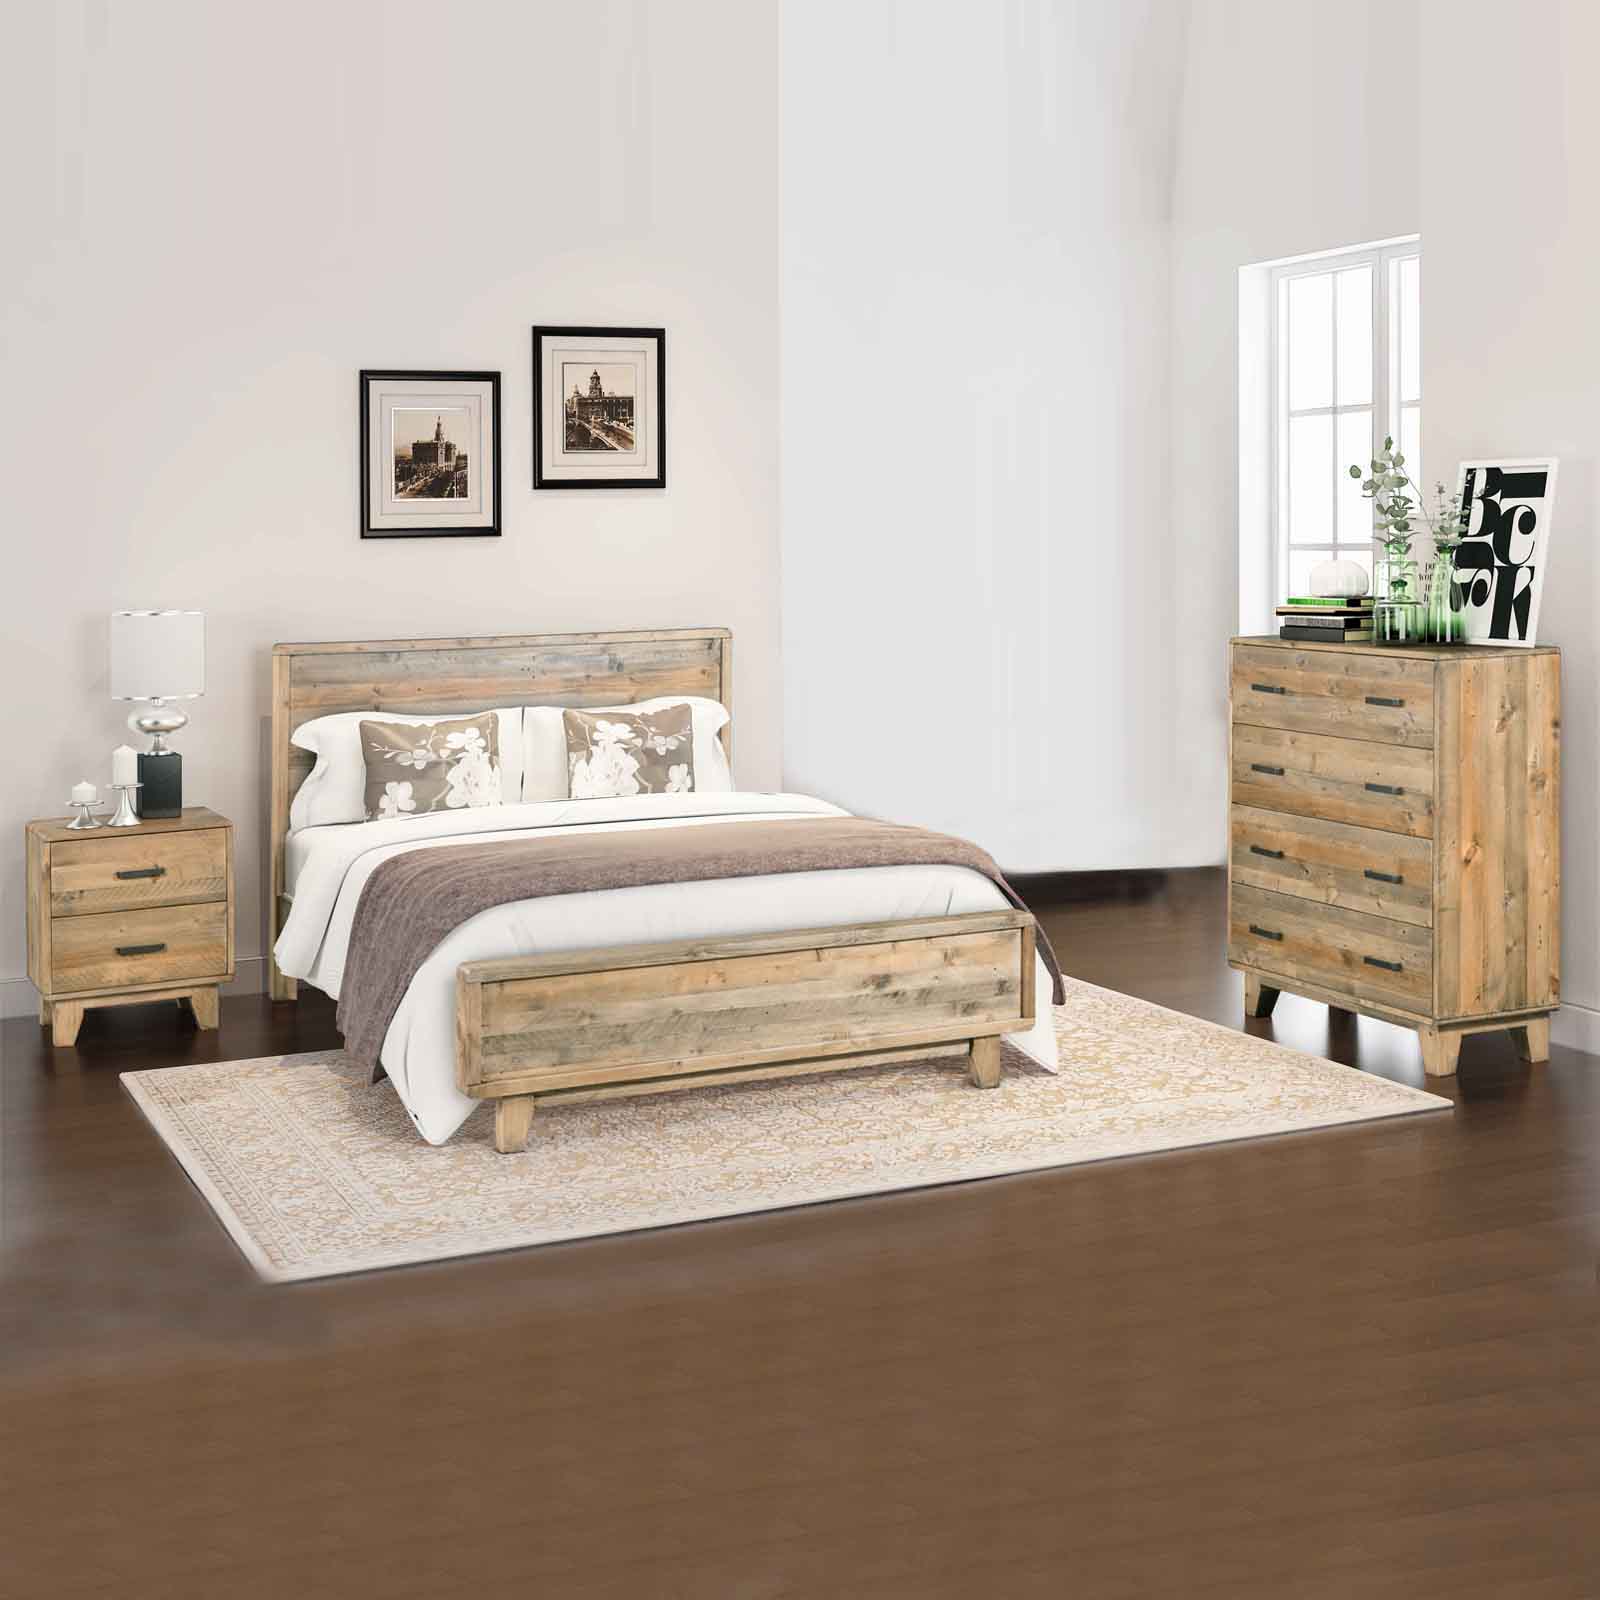 4 Pieces Bedroom Suite Double Size in Solid Wood Antique Design